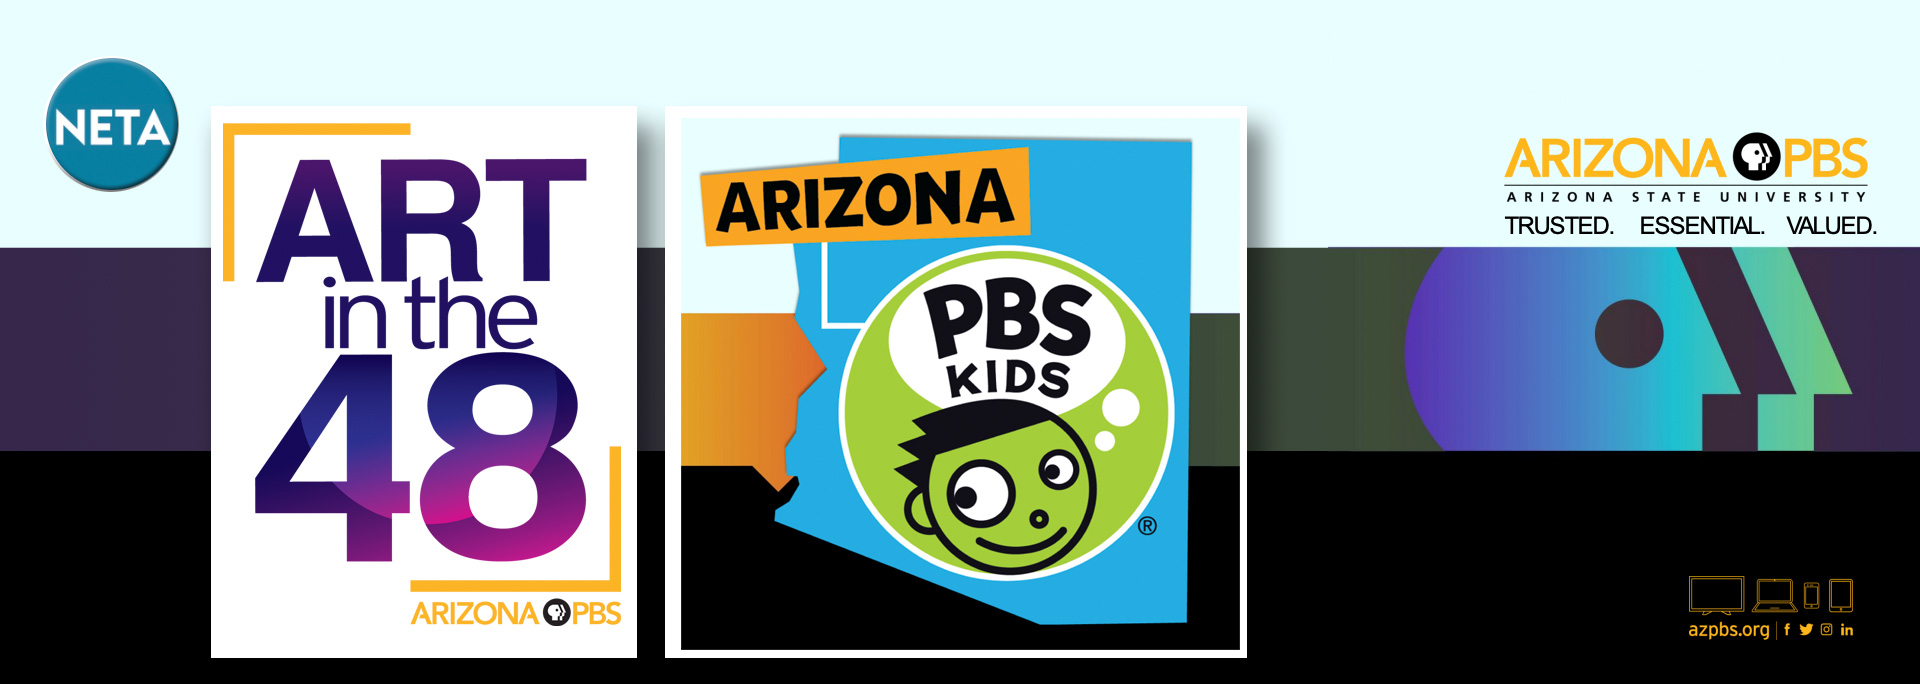 Arizona PBS took home two awards in the Overall Excellence category of the 53rd Annual Public Media Awards (PMAs) on January 25, 2022. The PMAs, presented by the National Educational Telecommunications Association (NETA), honor public media stations’ finest work in community engagement, content, education, and marketing/communications.